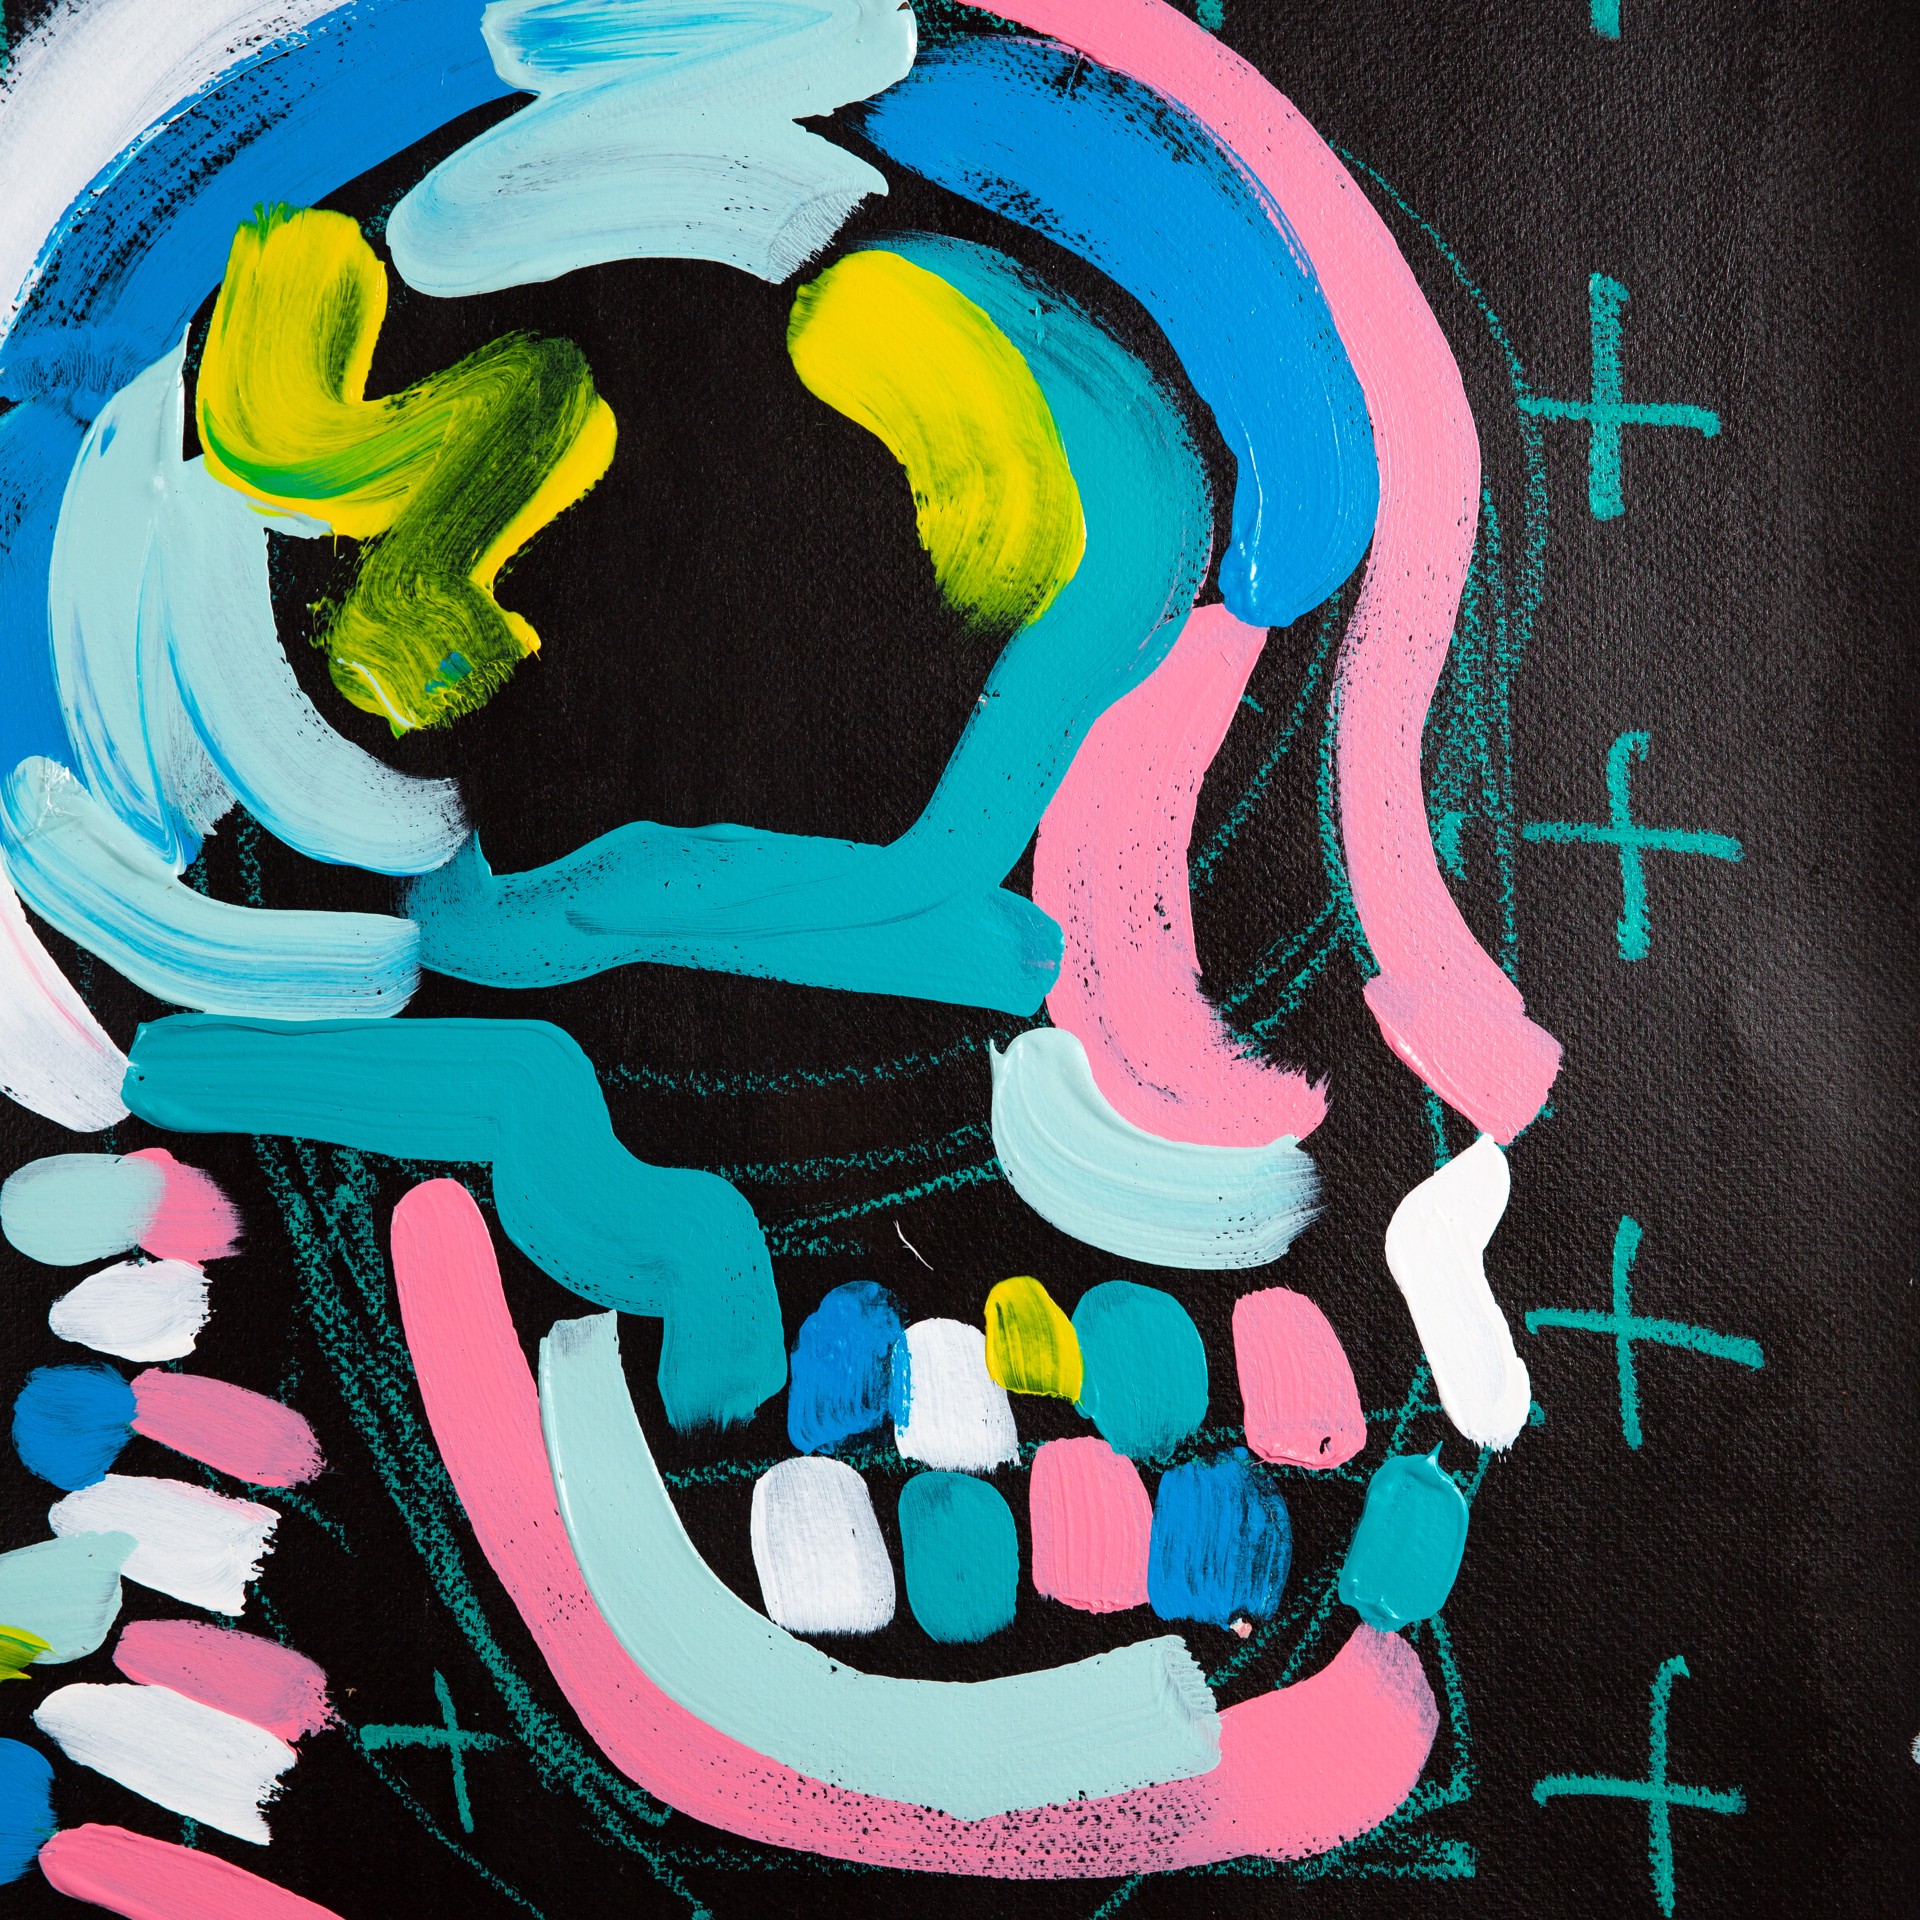 Looking at You by Bradley Theodore